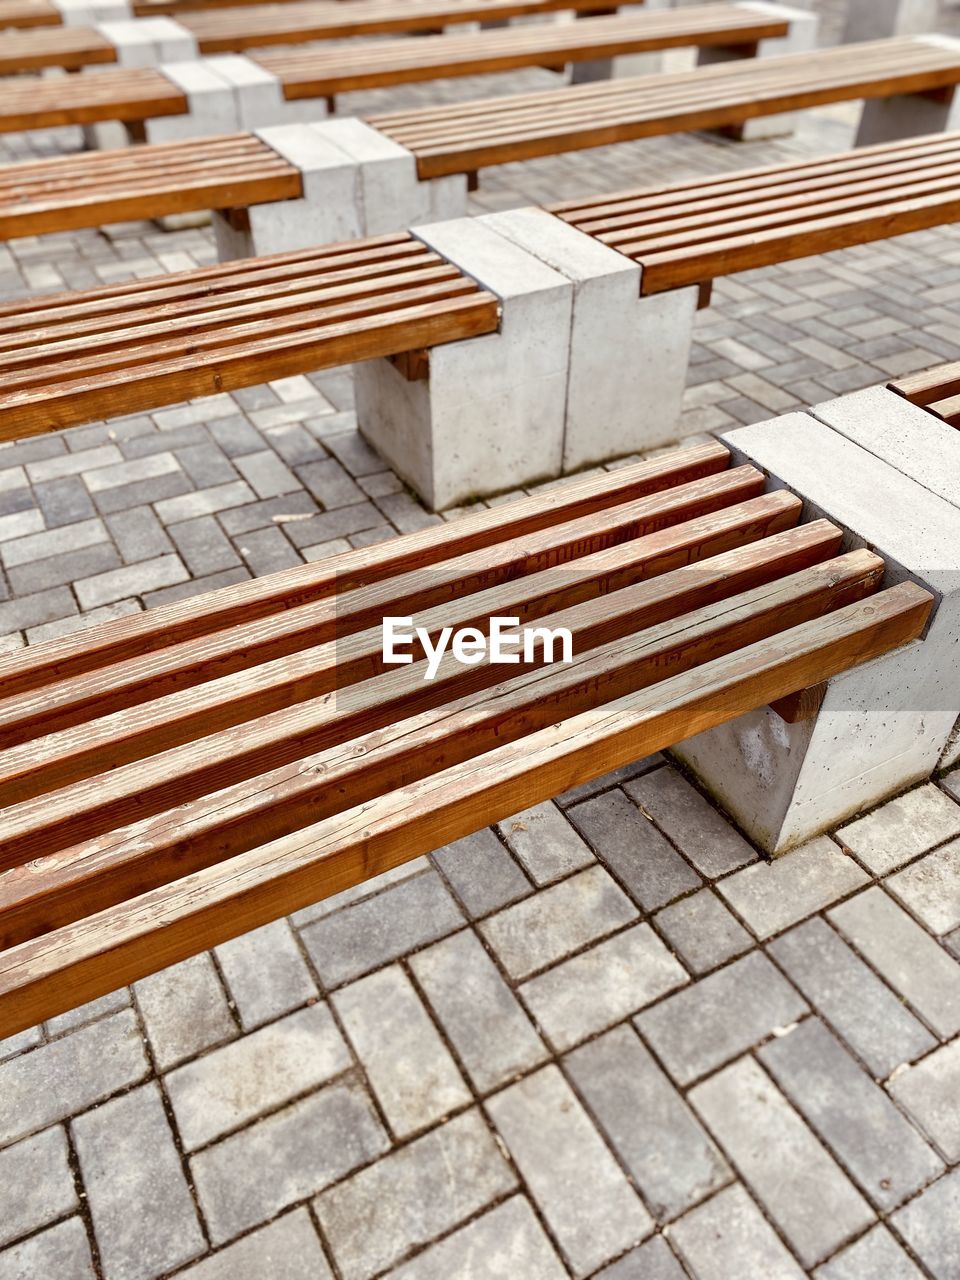 HIGH ANGLE VIEW OF EMPTY BENCH ON TABLE